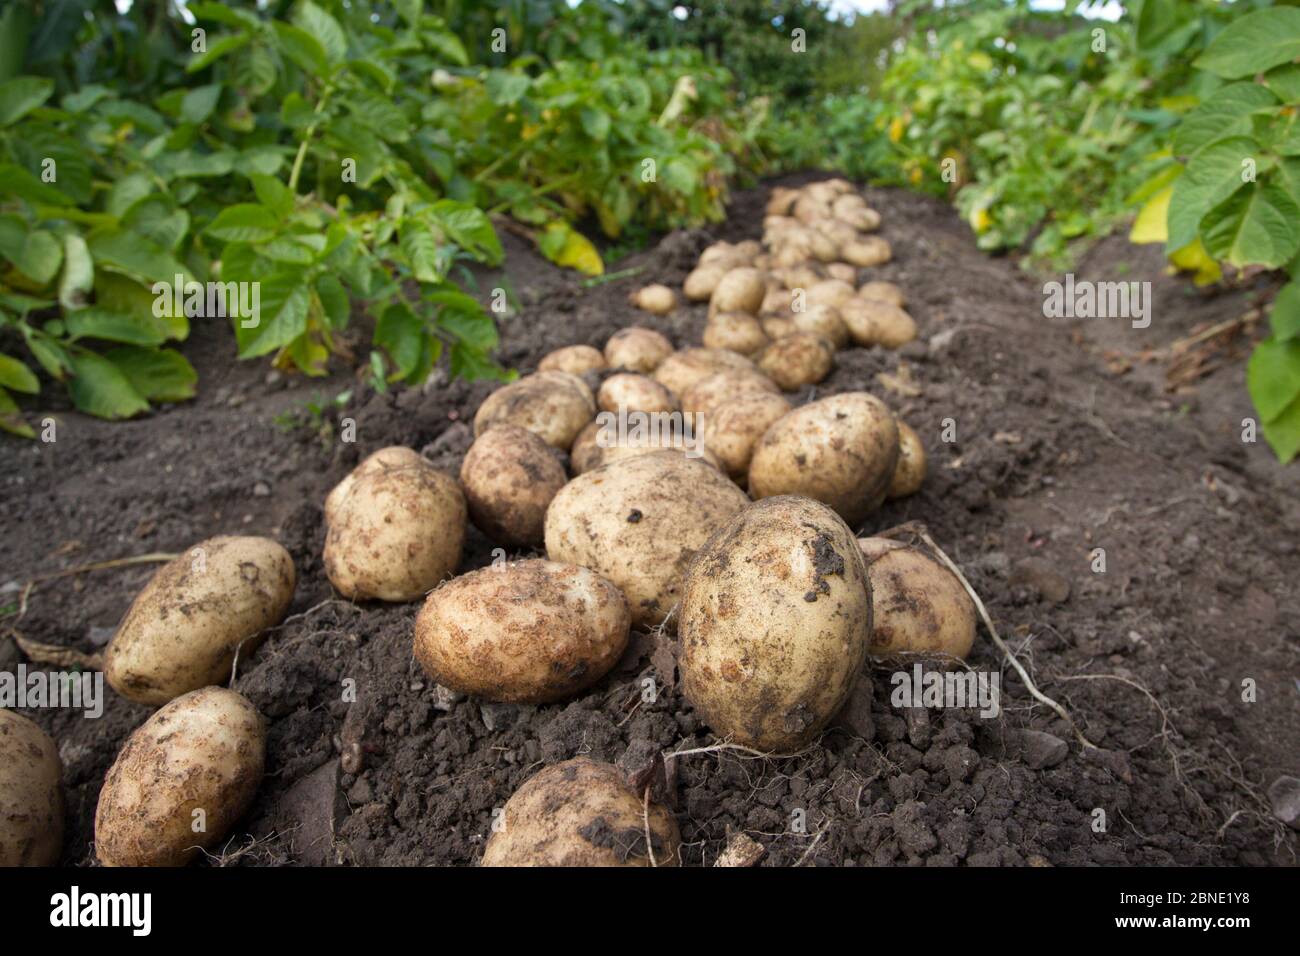 Crop of new freshly dug Rocket potatoes on the ground in a vegetable garden, Coleford, Gloucestershire, England, August. Stock Photo